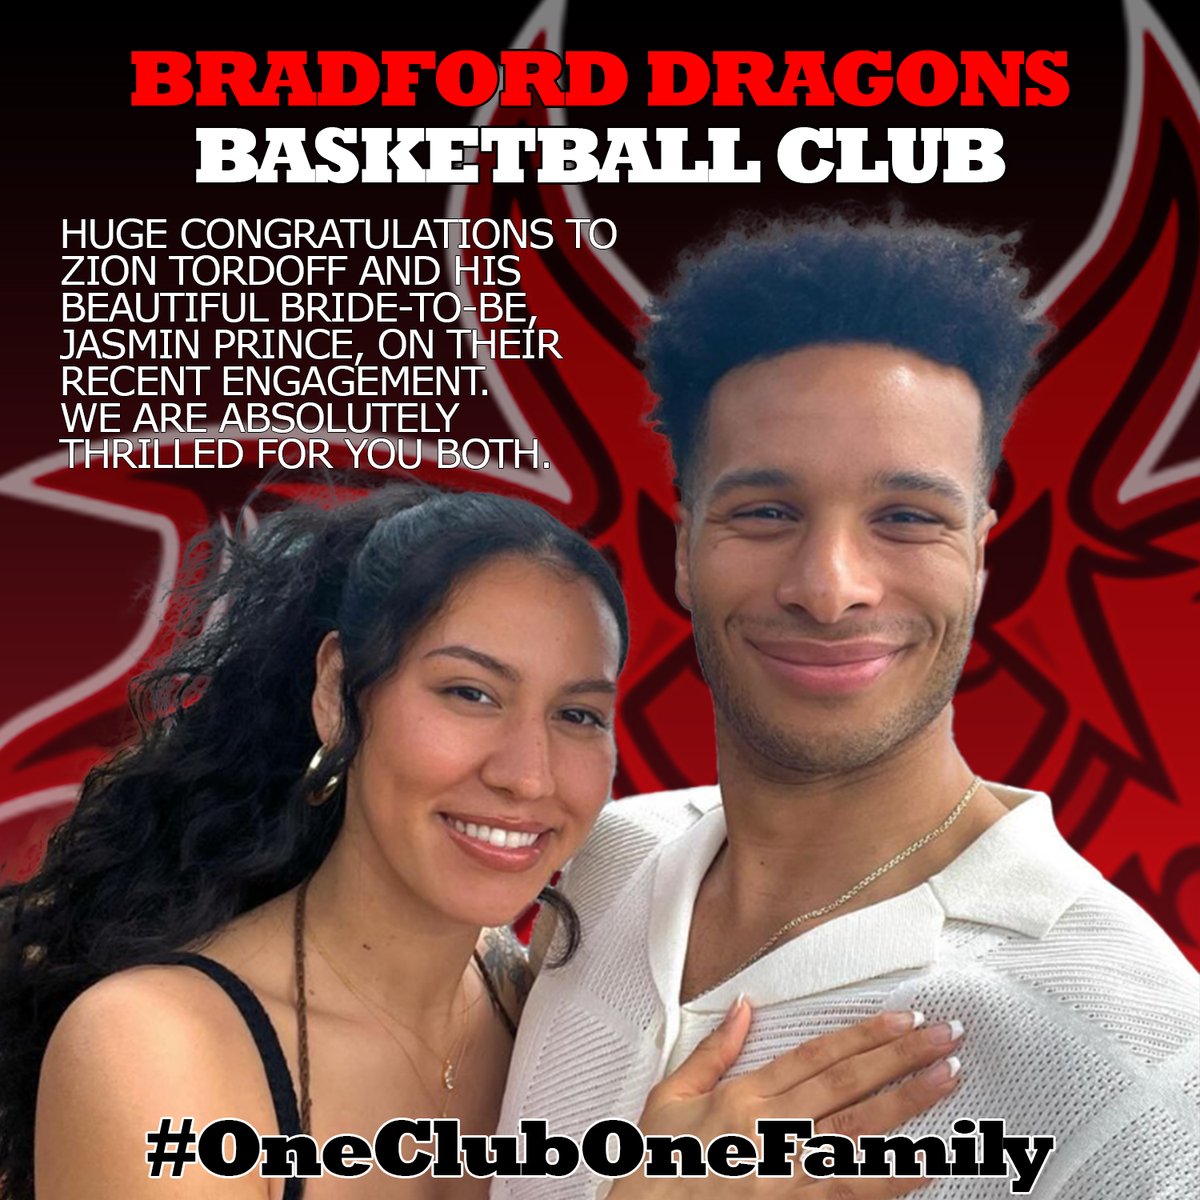 The club are absolutely thrilled with the news that Zion Tordoff and Jasmin Prince have recently become engaged. We are thrilled for you both and wish you every happiness for your future together. #BradfordDragons #MoreThanJustBasketball #OneClubOneFAMILY #Congratulations